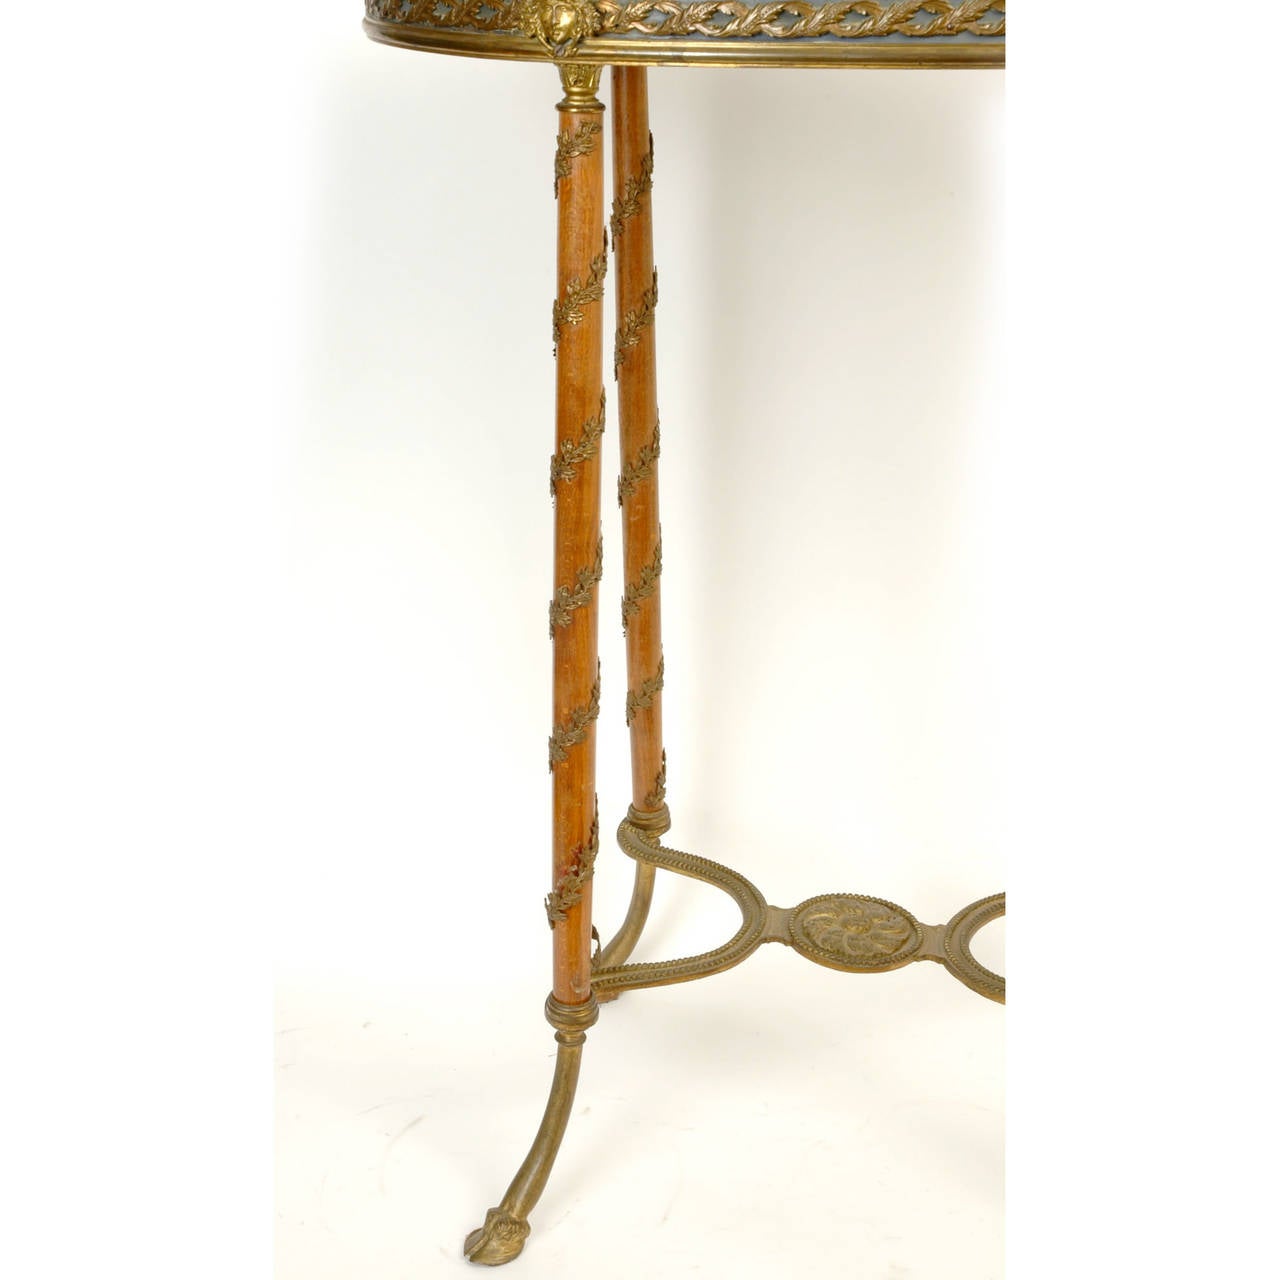 A fine Louis XVI style bronze-mounted marble-top oval side table with mask face motif
Stock number: F87.